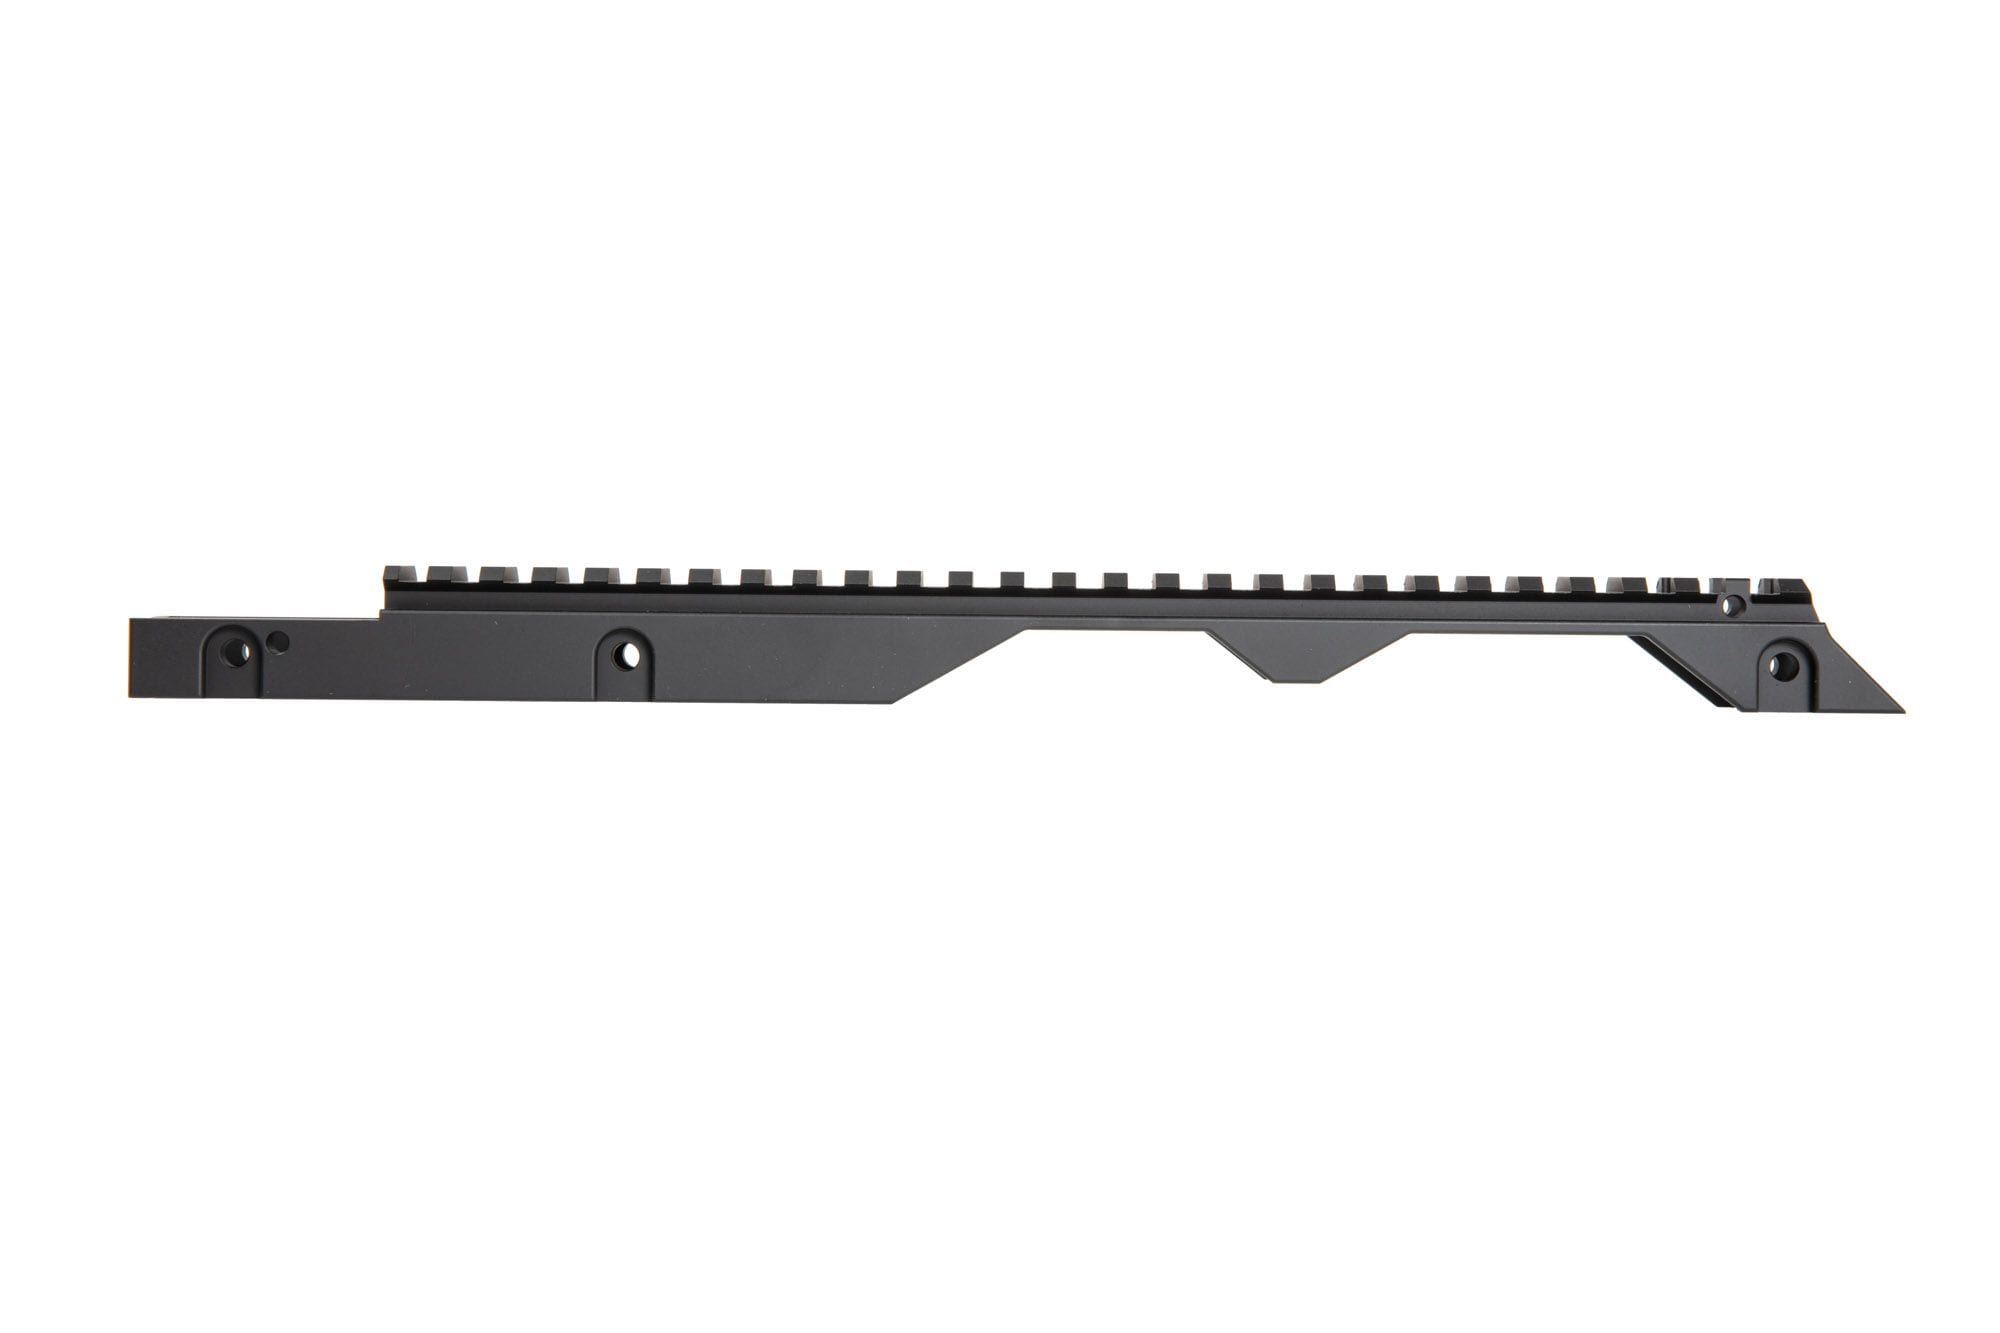 Top RIS rail for Specna Arms G-Series Replicas by Specna Arms on Airsoft Mania Europe